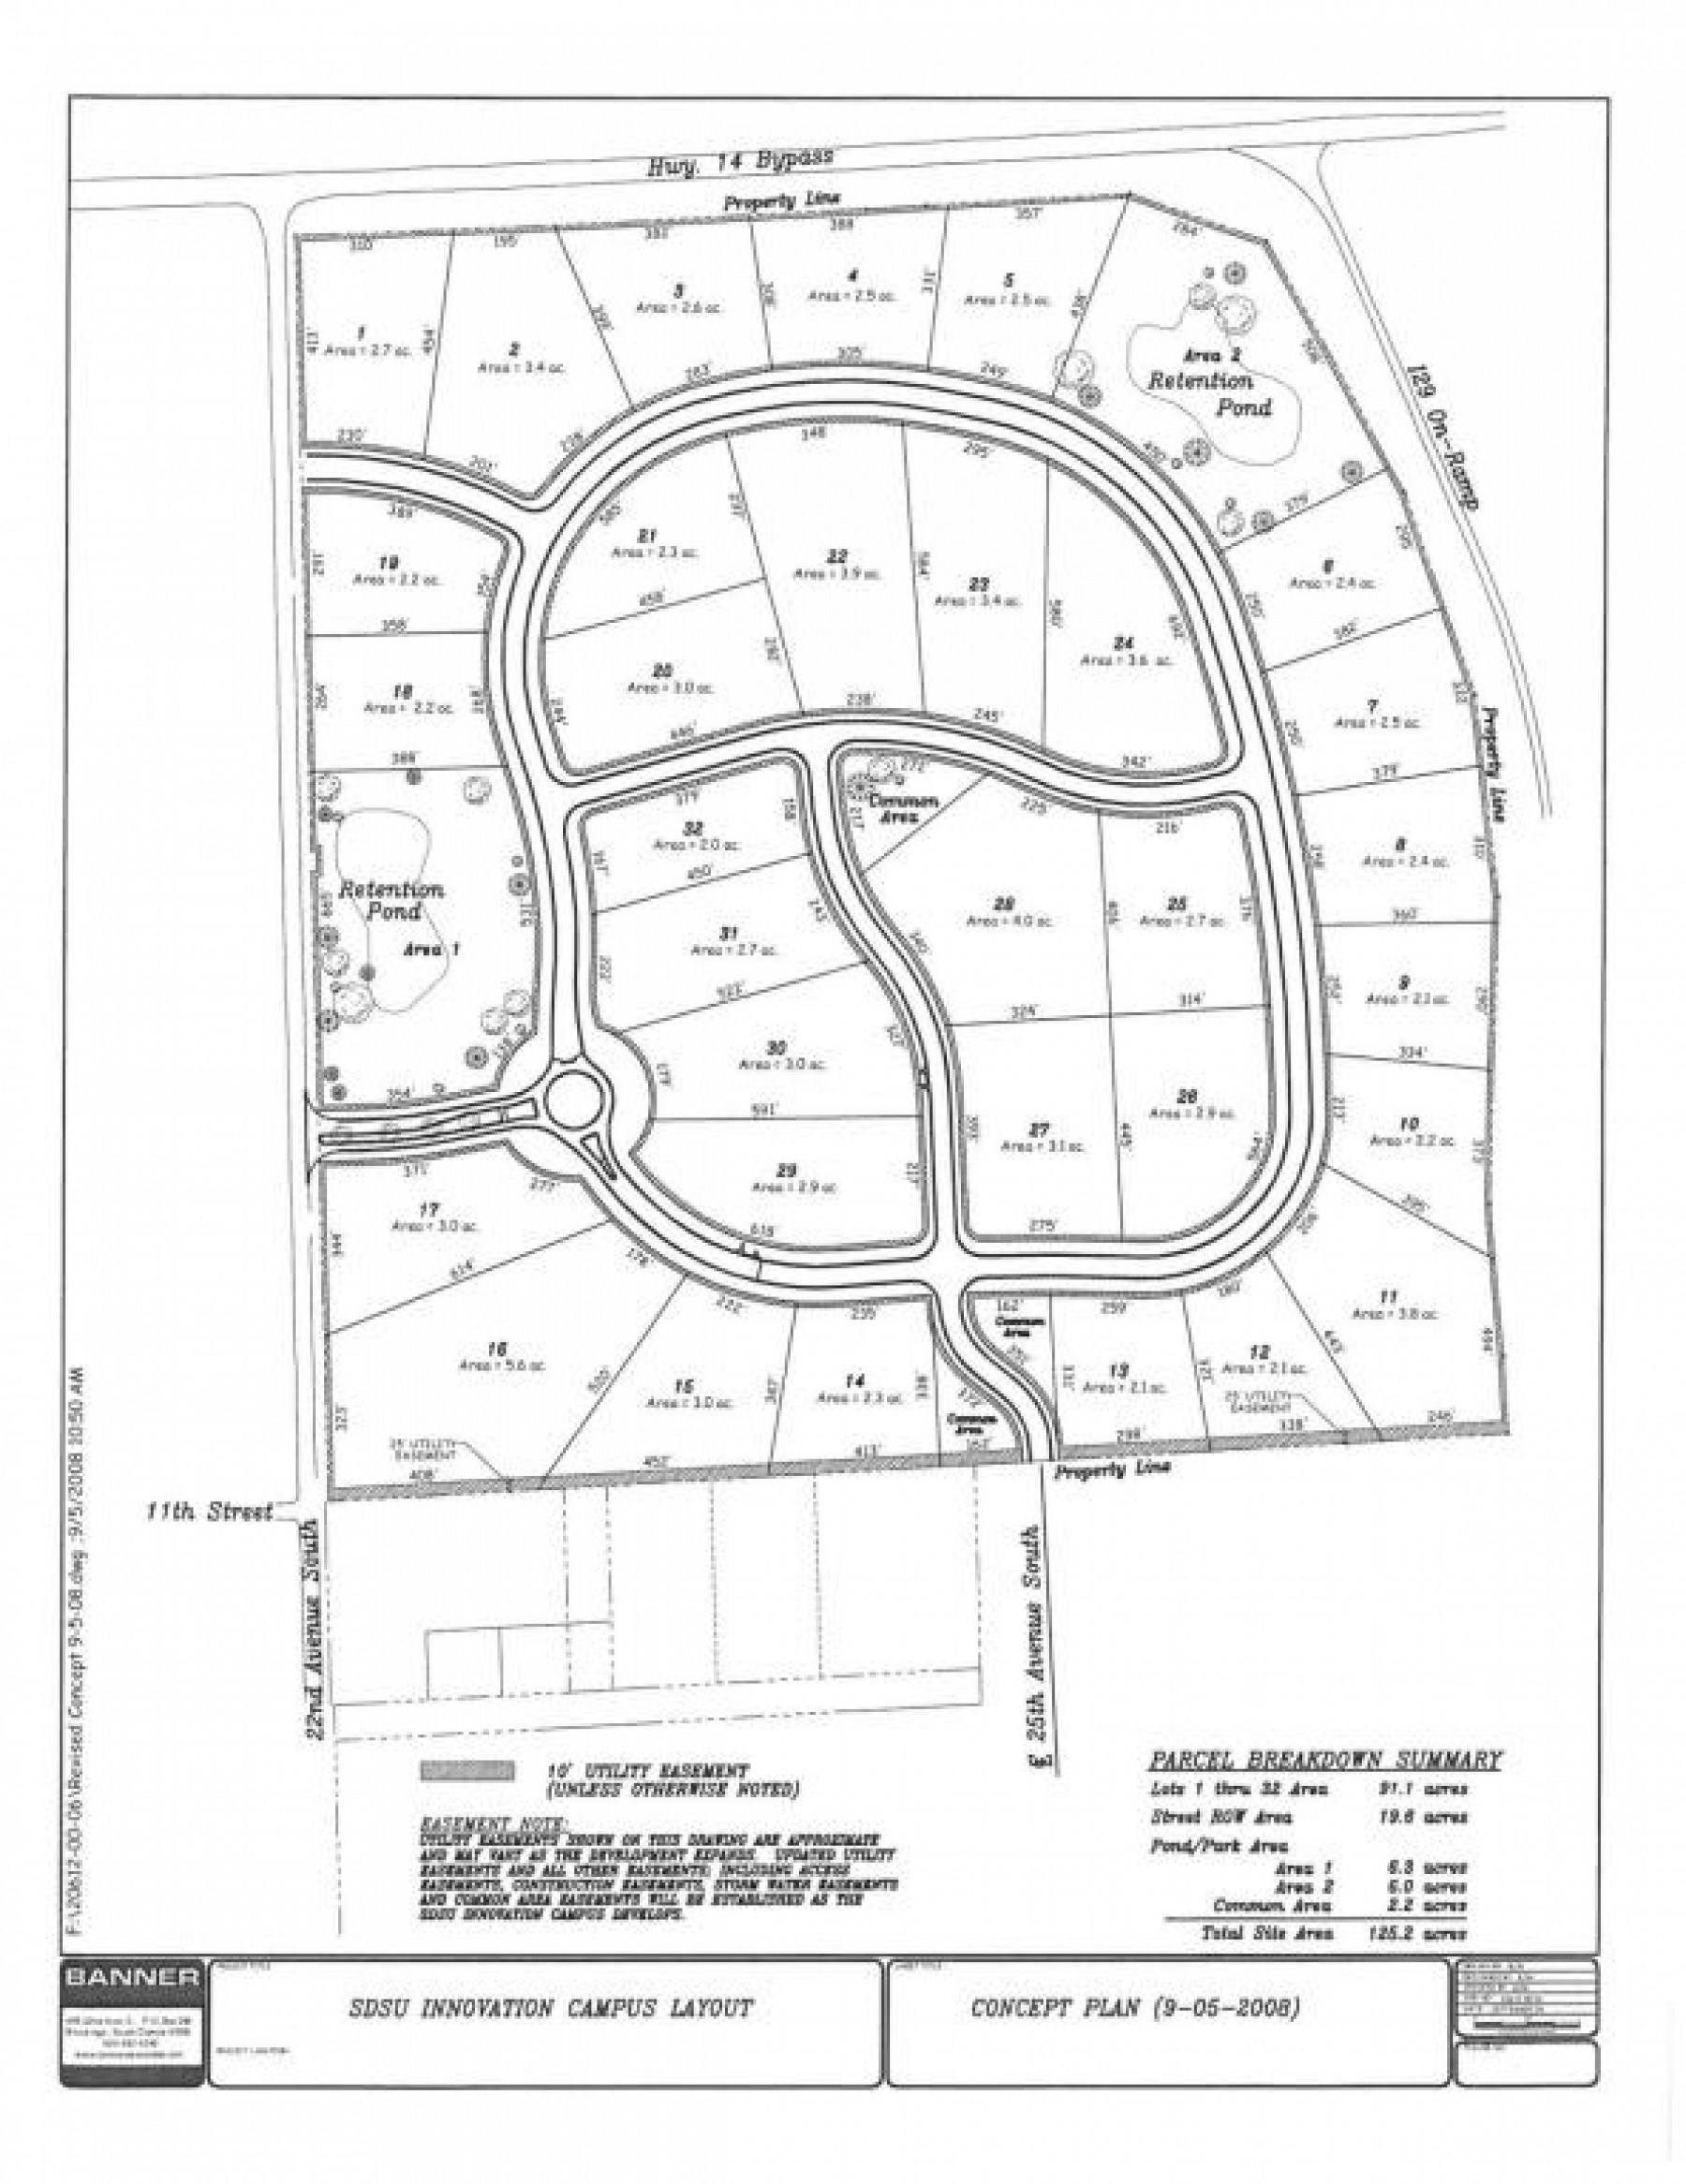 Lot 13 Innovation Campus, Brookings, SD 57006